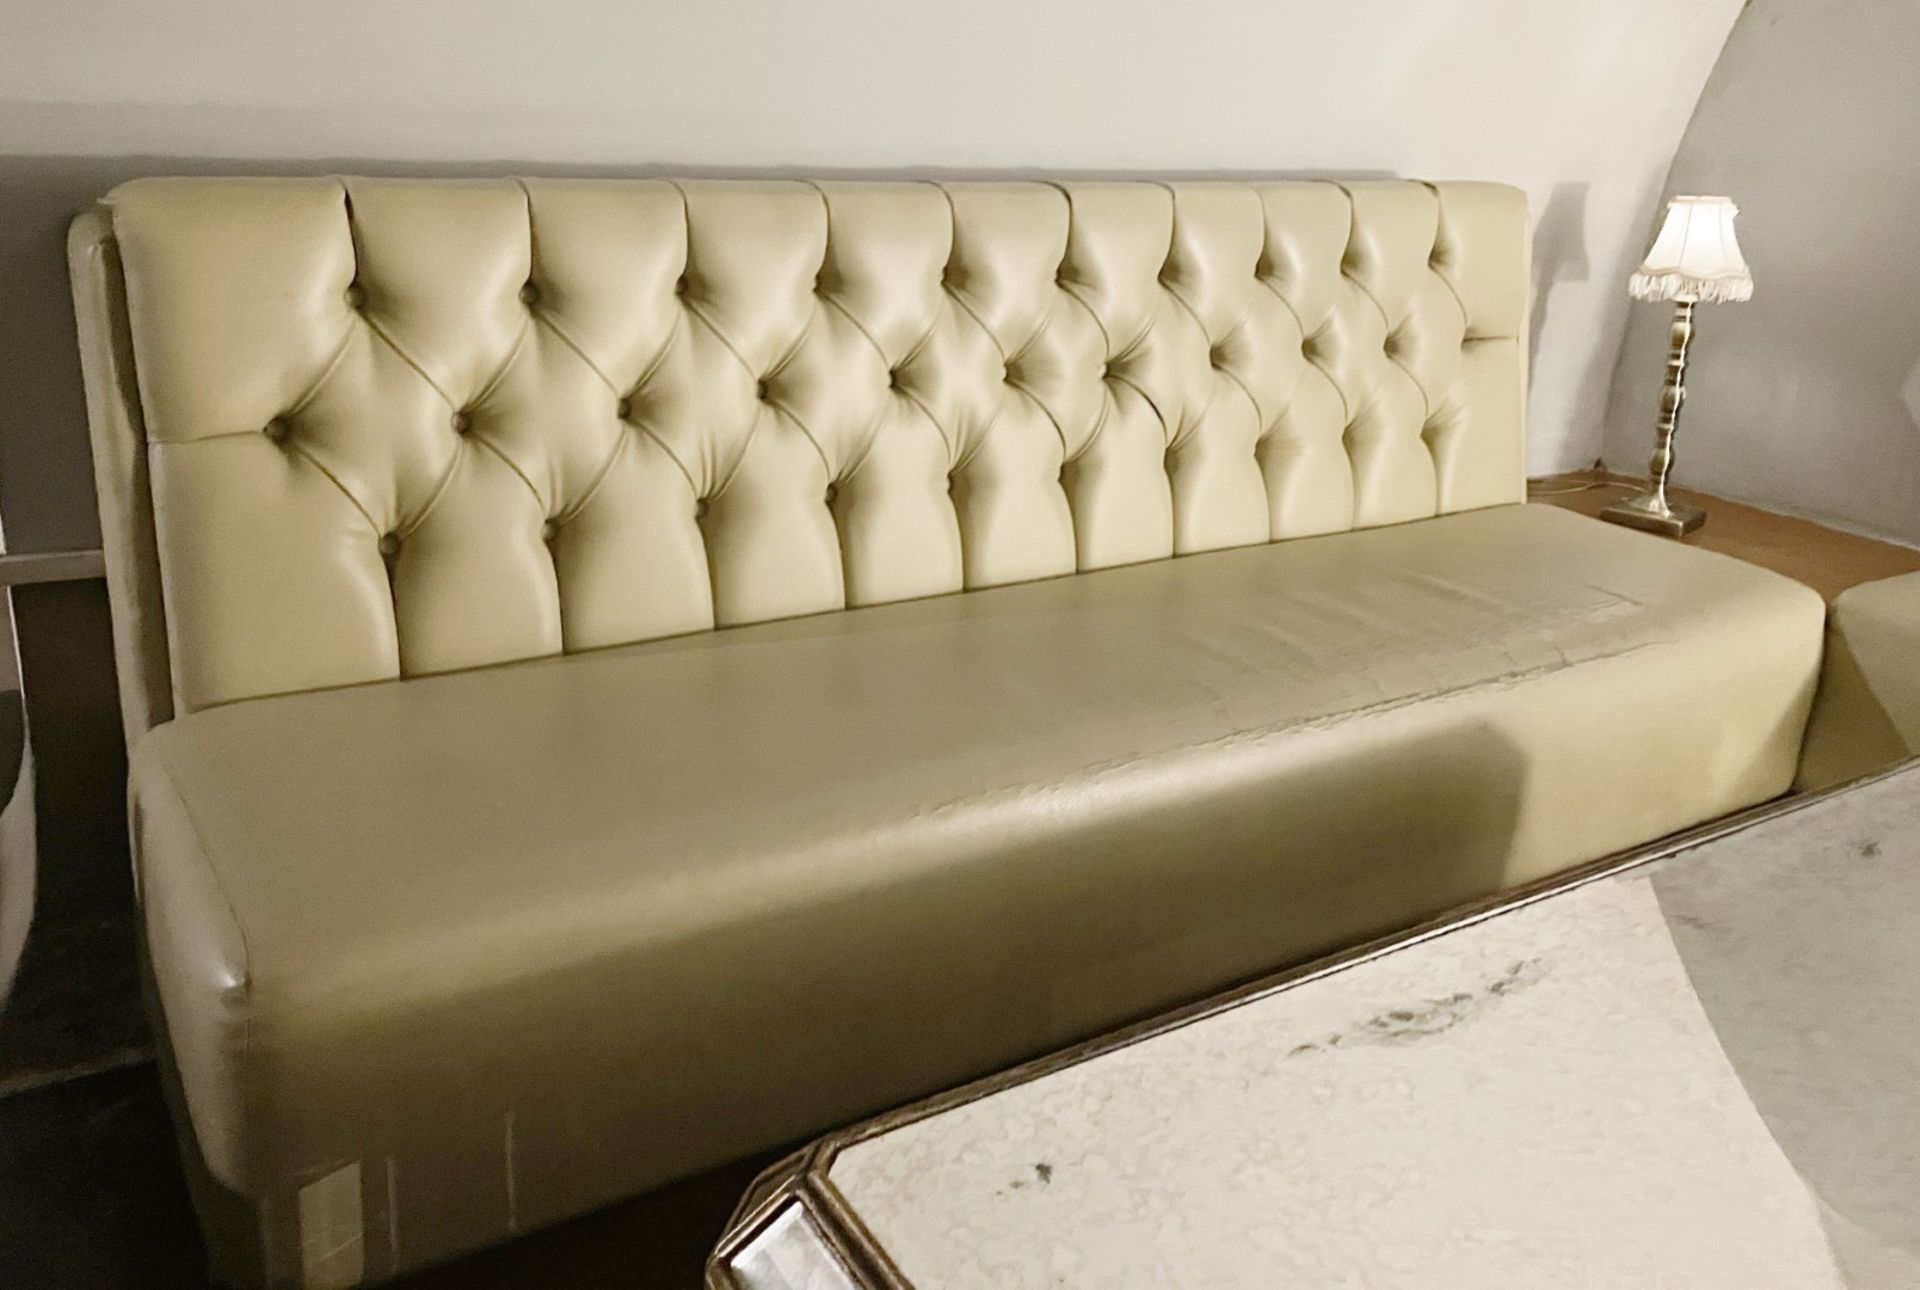 3 x Long Sections of Button Back Banquette Booth Seating Upholstered in a Cream Faux Leather - Image 8 of 8